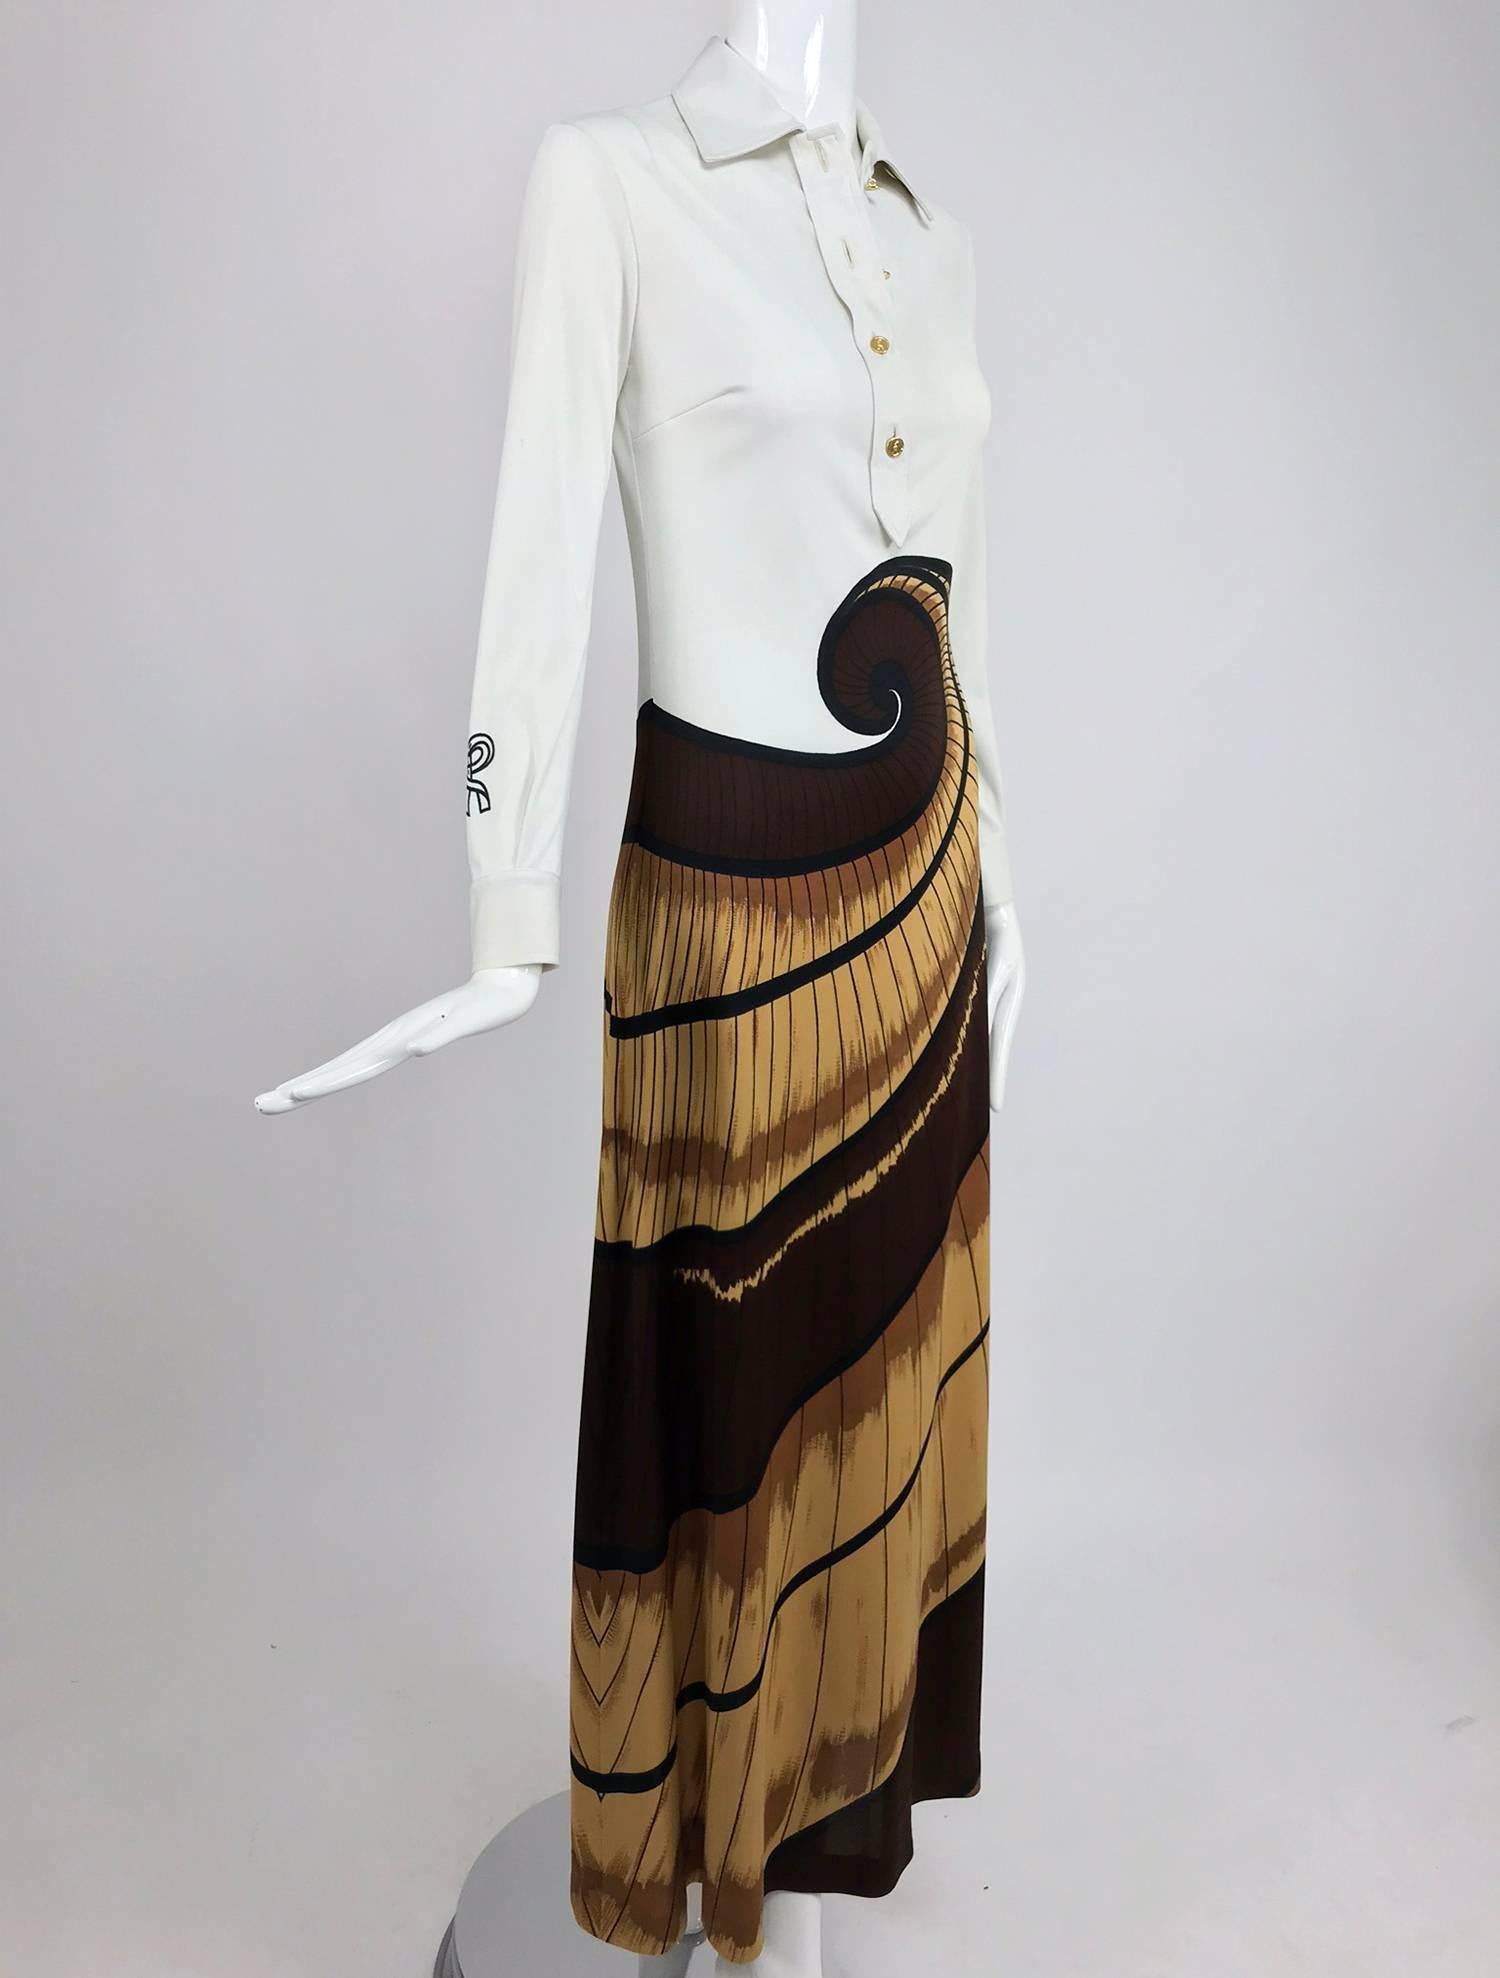 Roberta di Camerino Nautilus print maxi dress from the 1970s...An unusual di Camerino print from the 1970's the bodice in off white knit jersey with an oversize nautilus style print forming the focus of the dress...Done in blacks and browns it is an